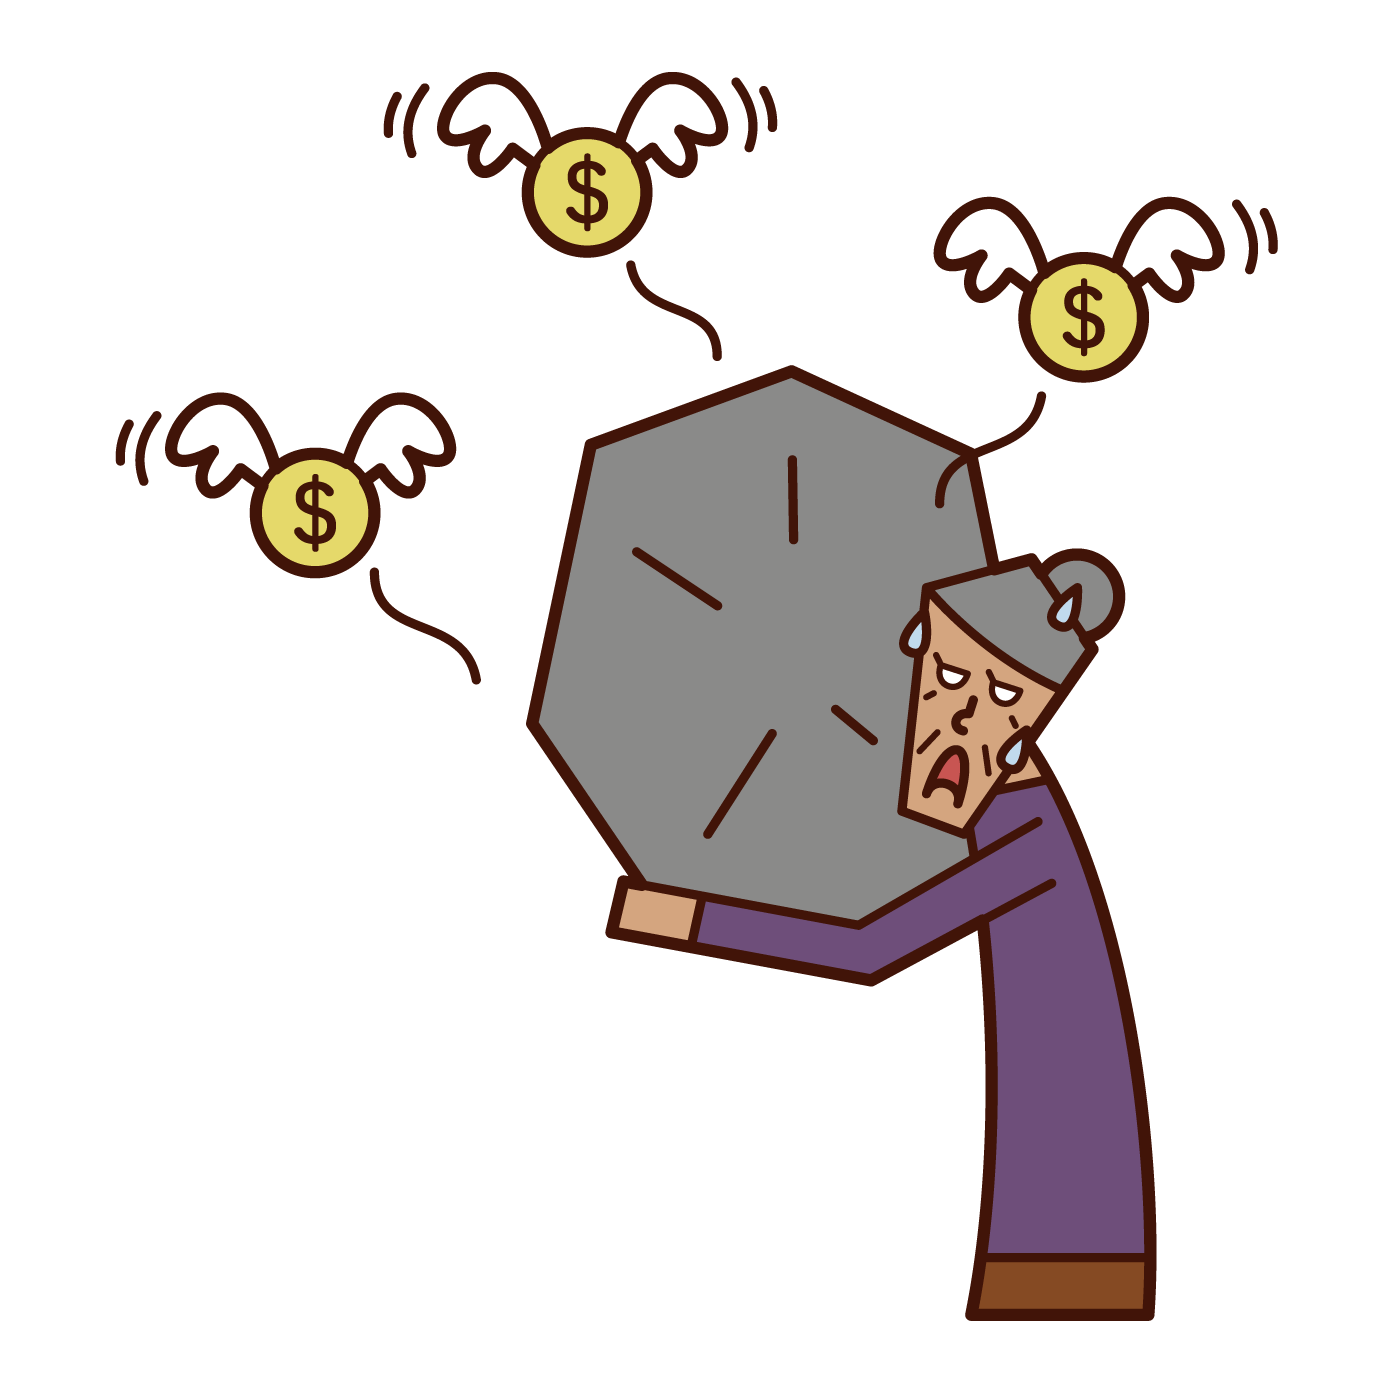 Illustration of a person (grandmother) who is in debt